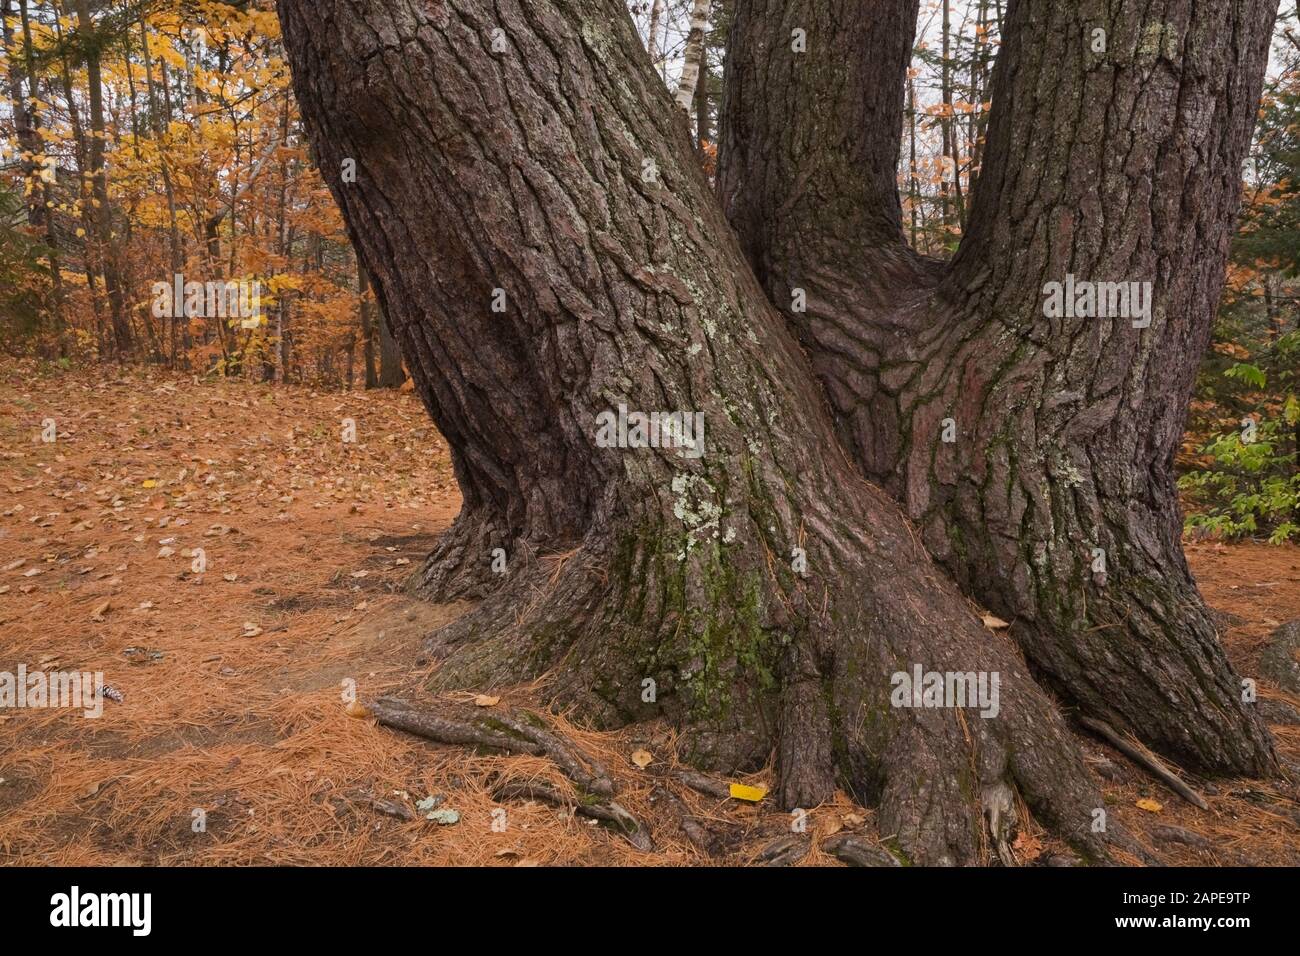 Close-up of large Pinus resinosa - Pine tree trunks spotted with green Bryophyta - Moss and lichen growth in autumn Stock Photo